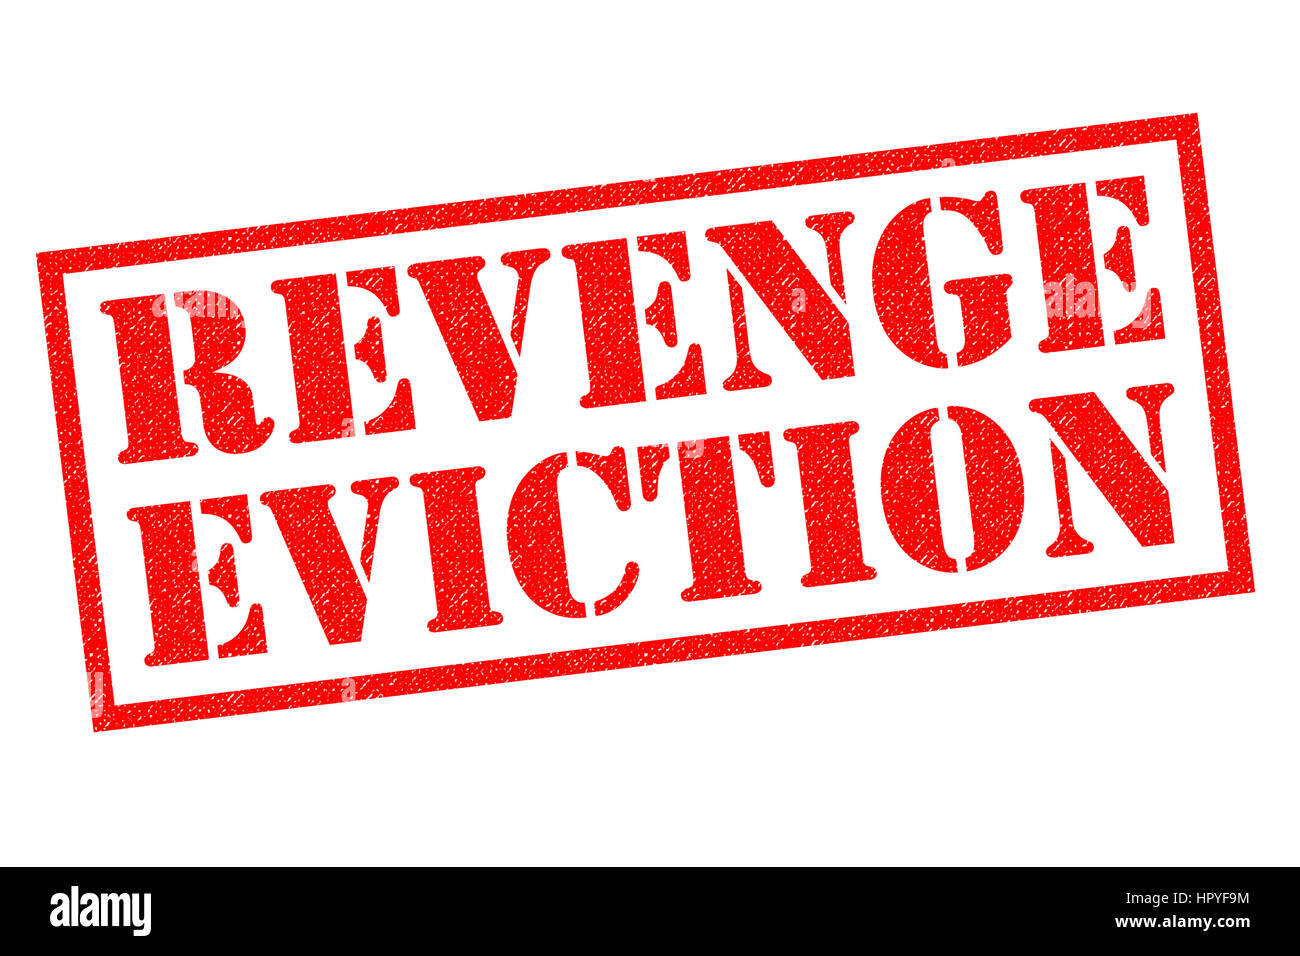 REVENGE EVICTION red Rubber Stamp over a white background. Stock Photo